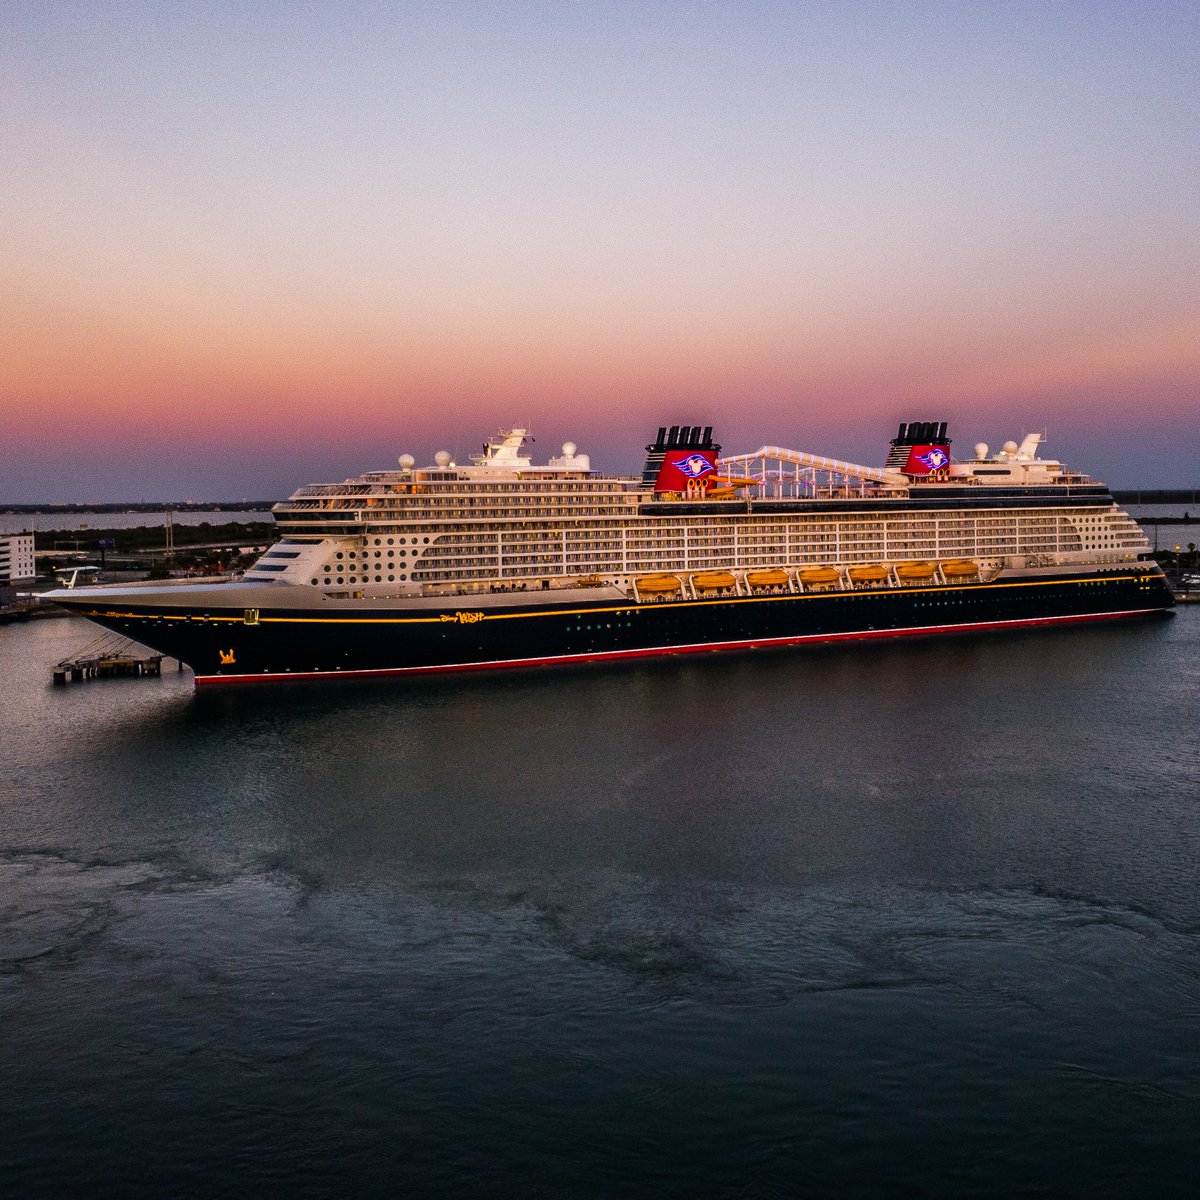 @DisneyCruise , Disney Wish docked starboard side at CT-8 located in Port Canaveral FL during sunrise. 🌞#disneycruiseline #disneywish